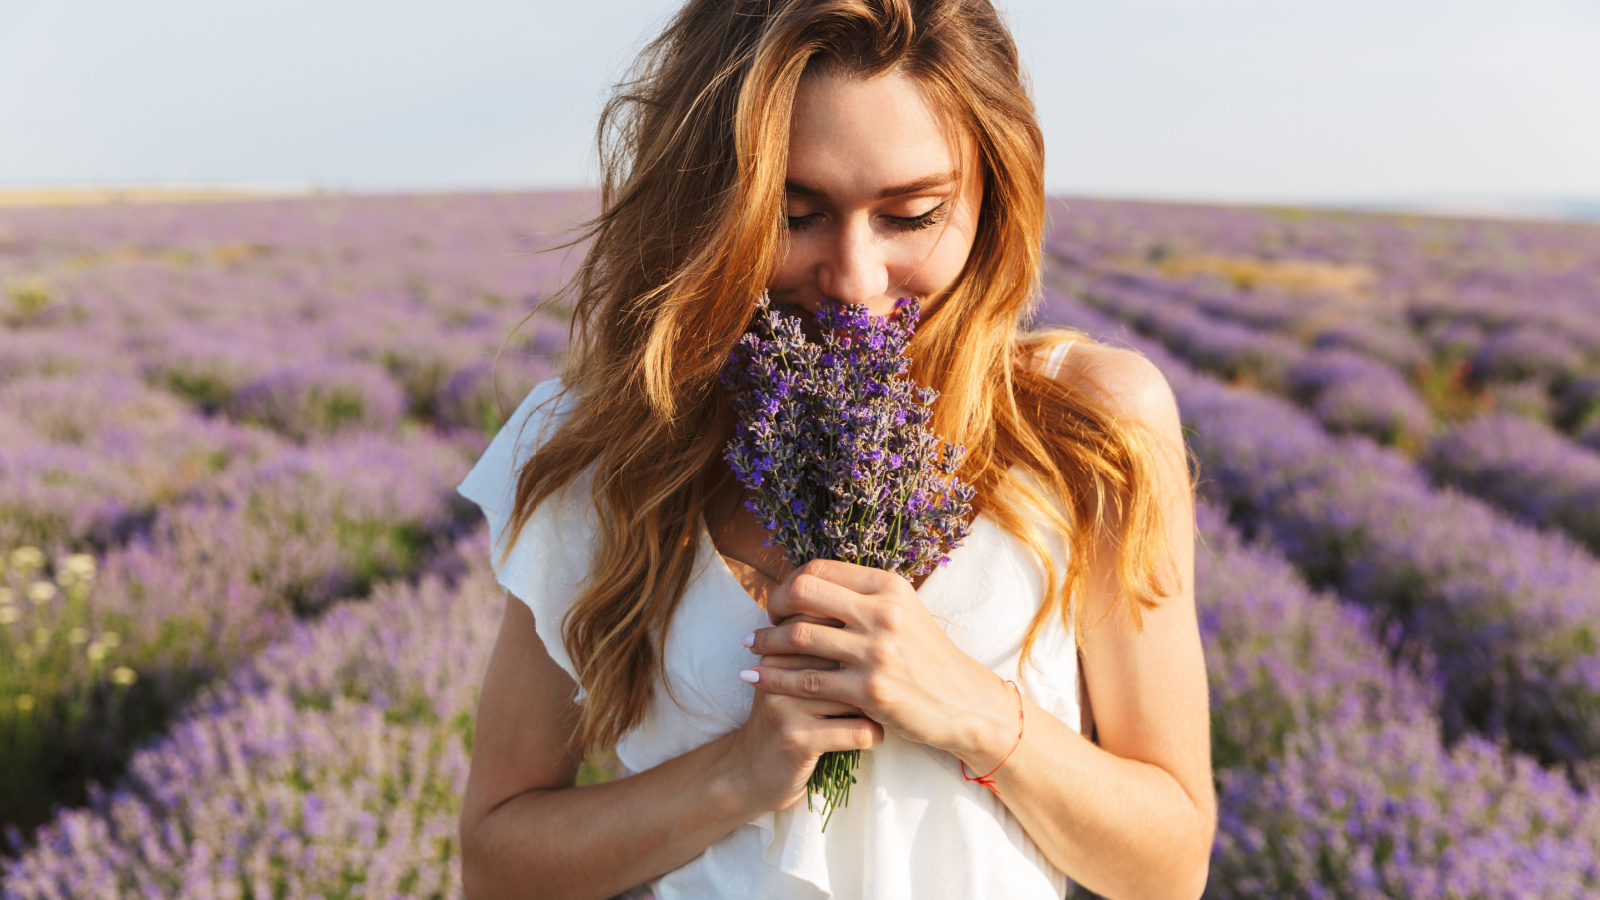 image credit: Dean Drobot/Shutterstock <p><span>Lavender’s floral fragrance carries you into a serene landscape, where each breath becomes a note in a symphony of relaxation. As you inhale deeply, the scent wraps around your thoughts like a soft, velvety blanket, easing away the day’s stress. The room fades, and you find yourself wandering through a blooming lavender field, each step grounding you further into tranquility. In this state, your meditation deepens, cradled by the gentle embrace of lavender’s calming essence.</span></p>